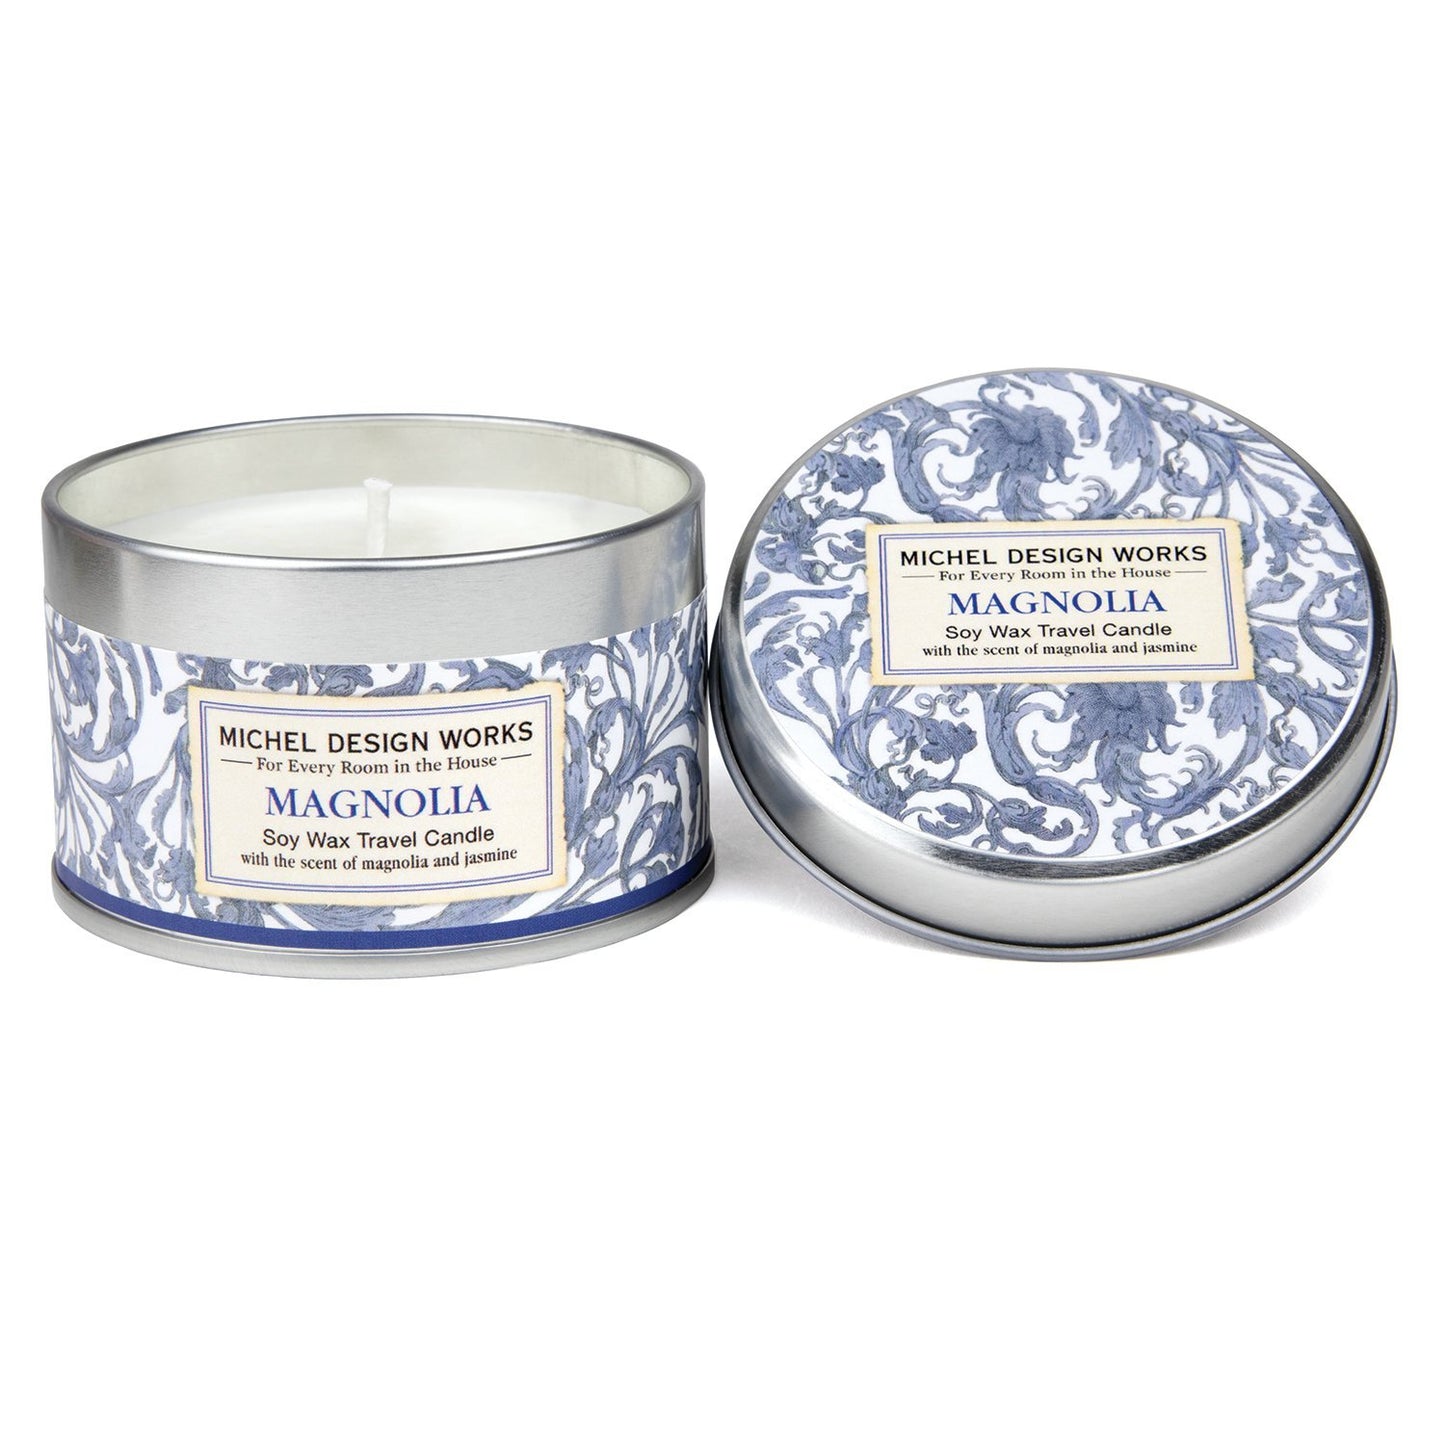 Magnolia Soy Wax Travel Candle